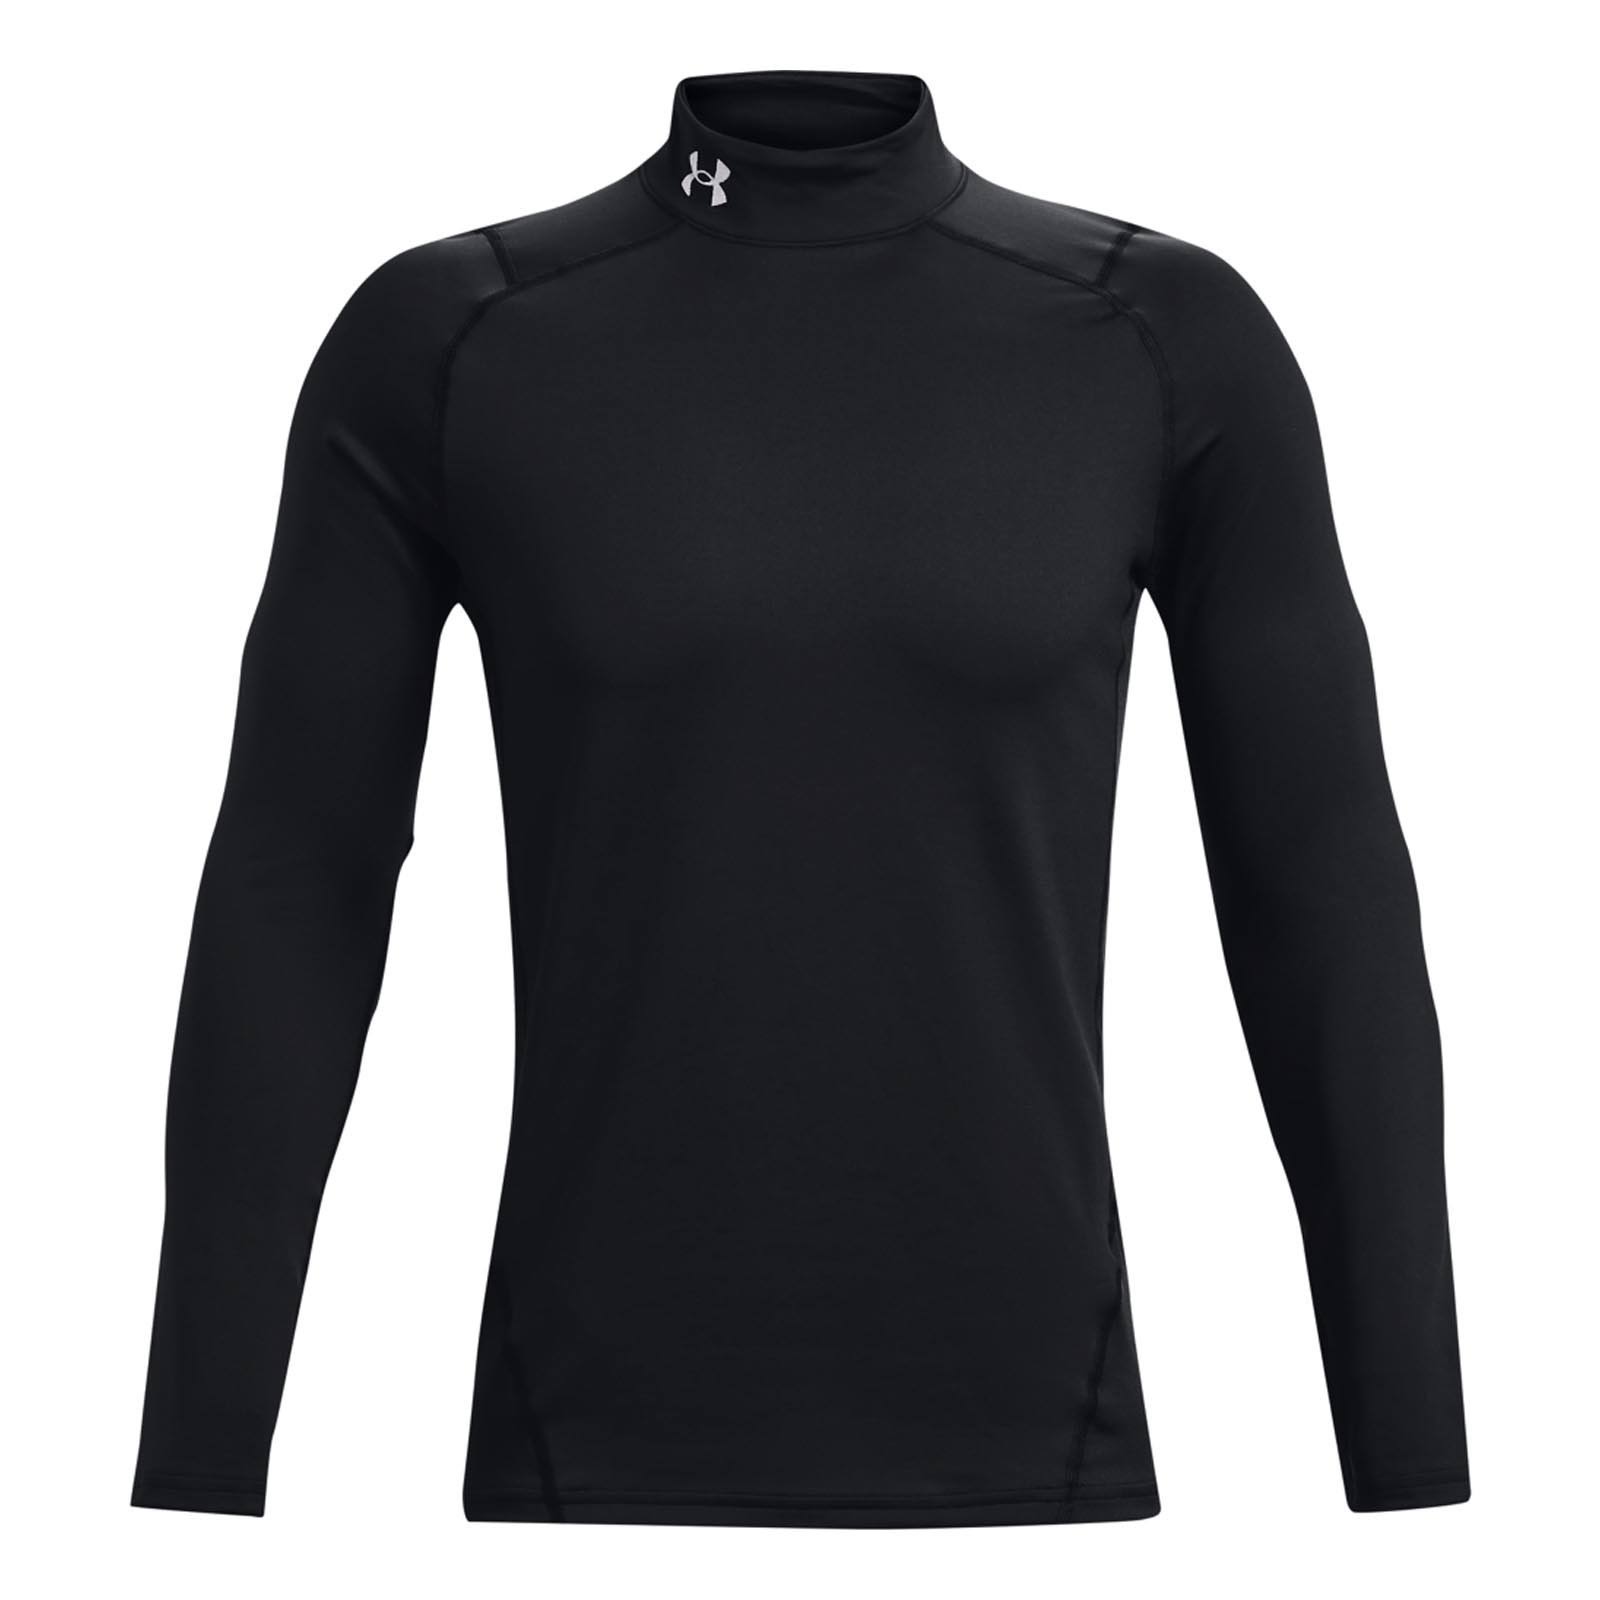 Under Armour Mens ColdGear Armour Fitted Mock - Black - XL